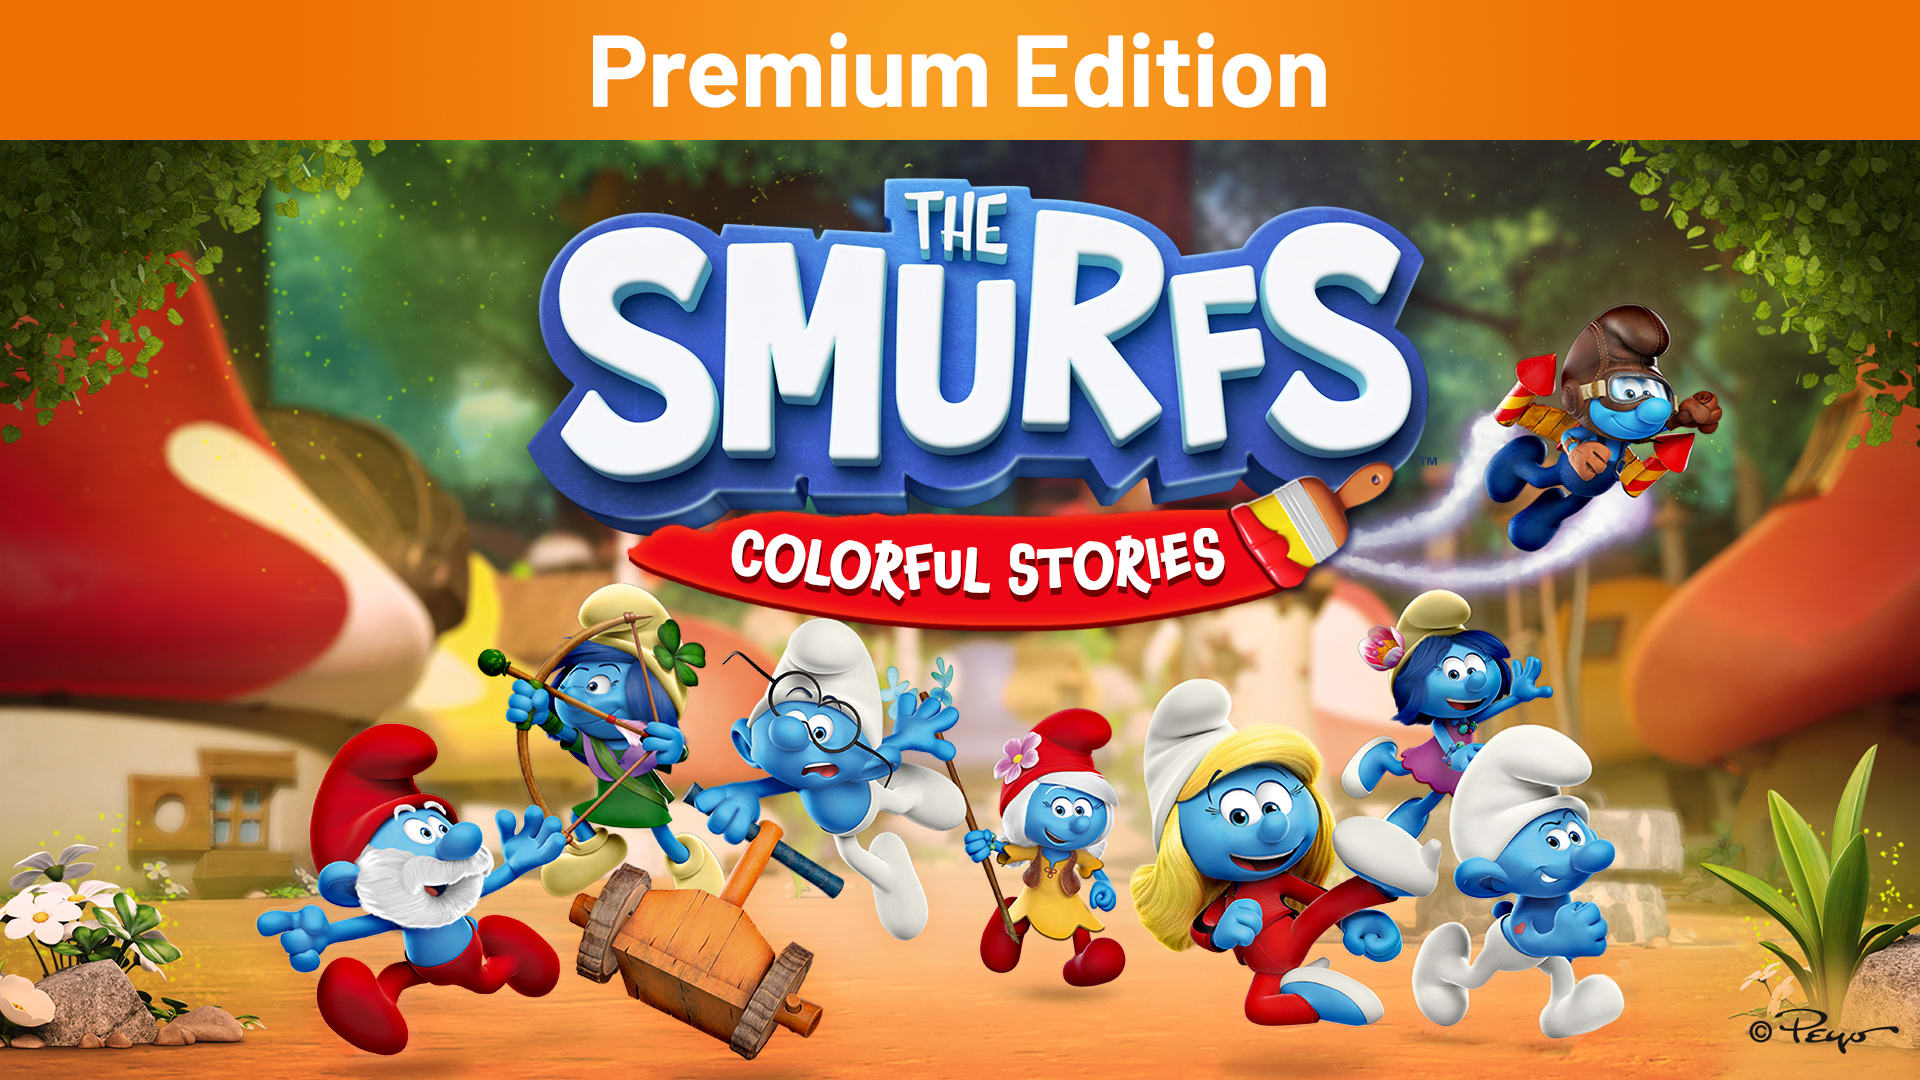 The Smurfs: Colorful Stories Premium Edition